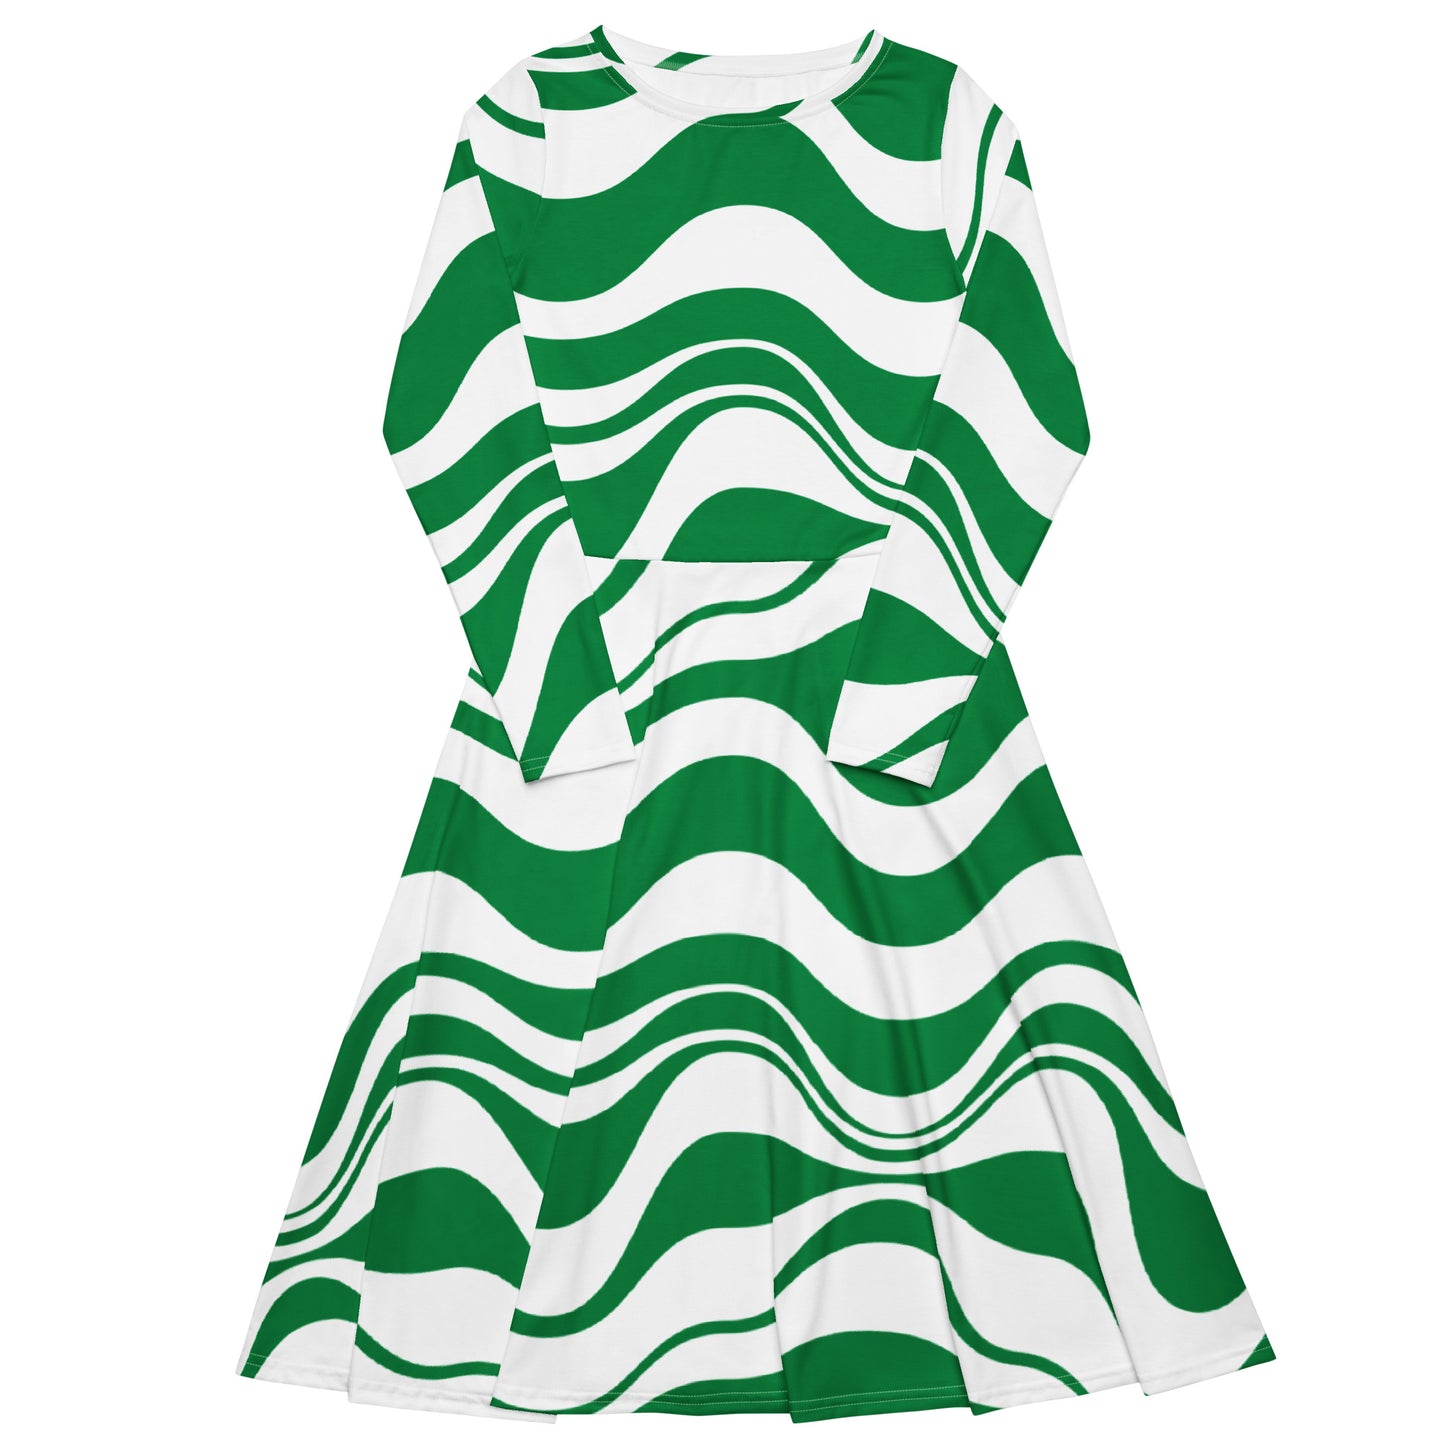 ENERGY WAVES green - Midi dress with long sleeves and handy pockets